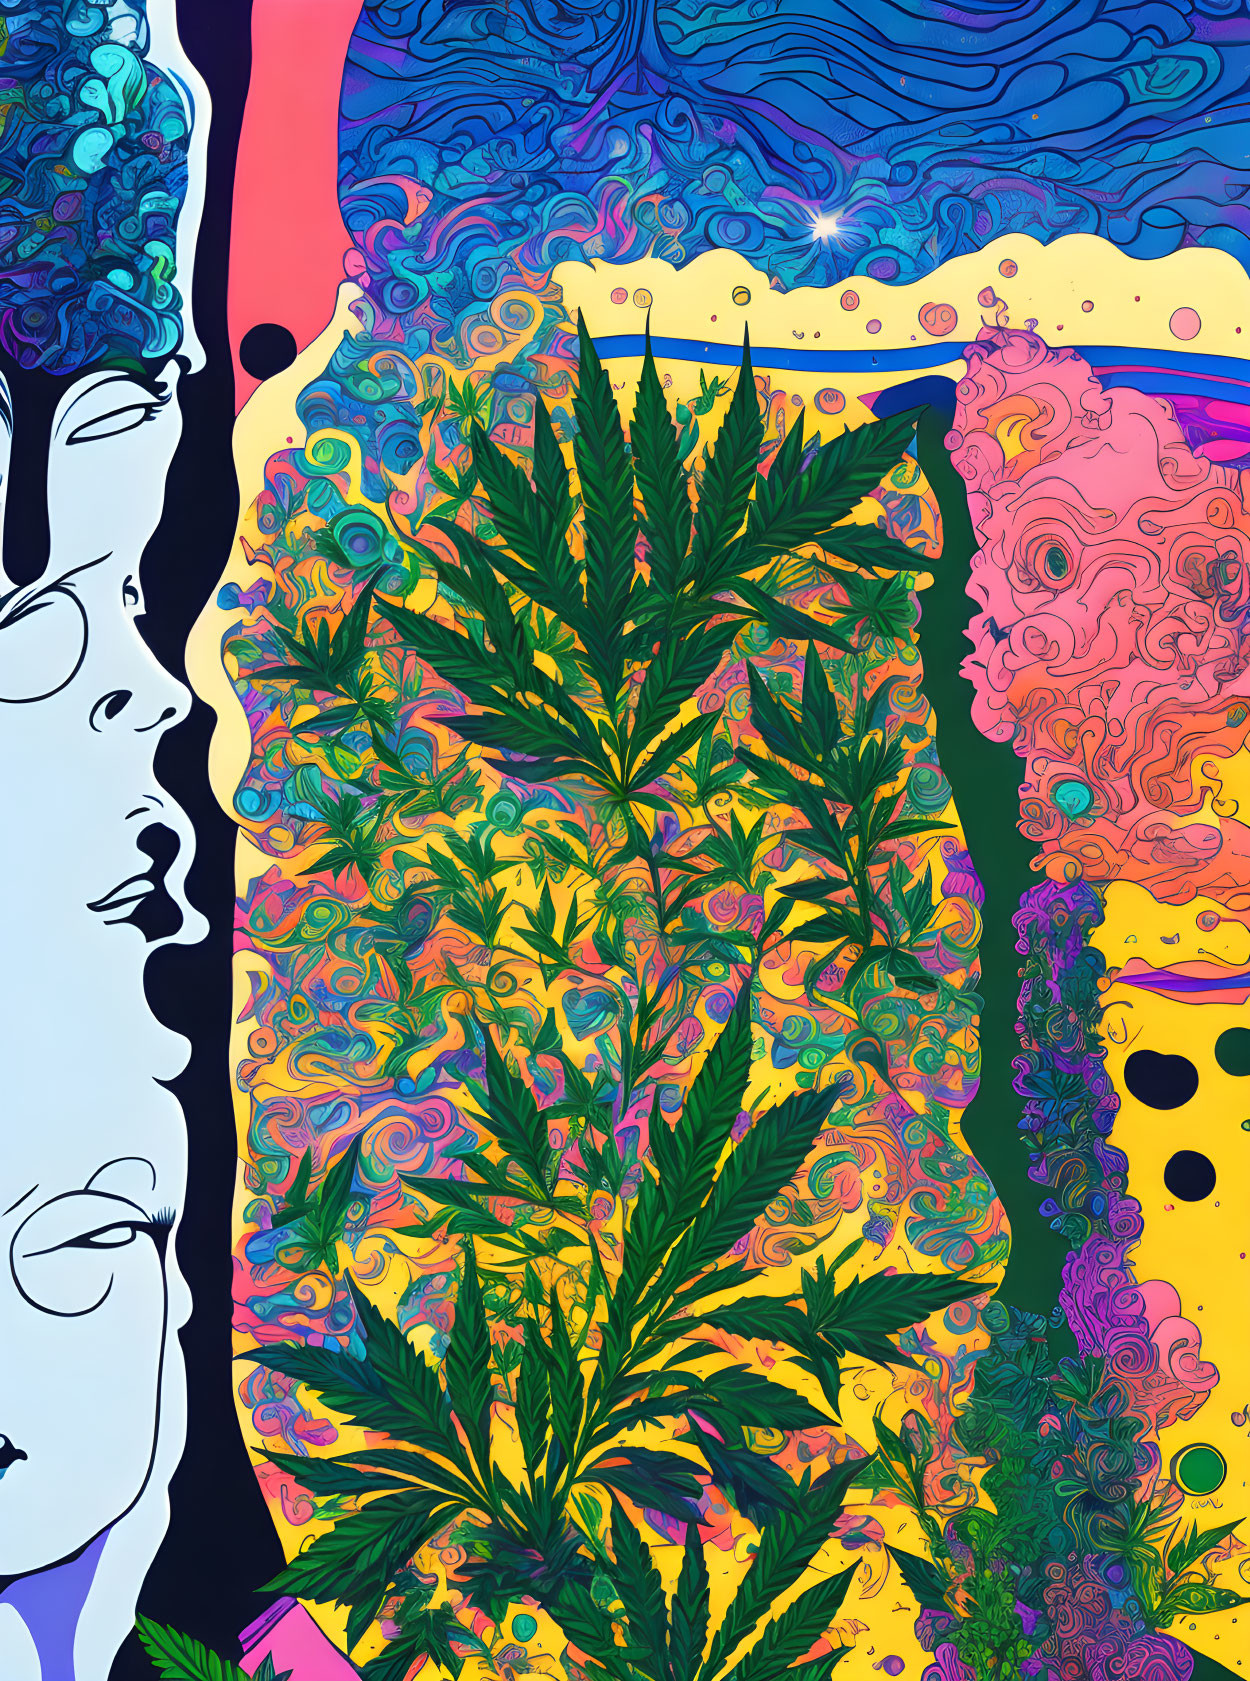 Colorful psychedelic artwork with cannabis leaf pattern and abstract faces